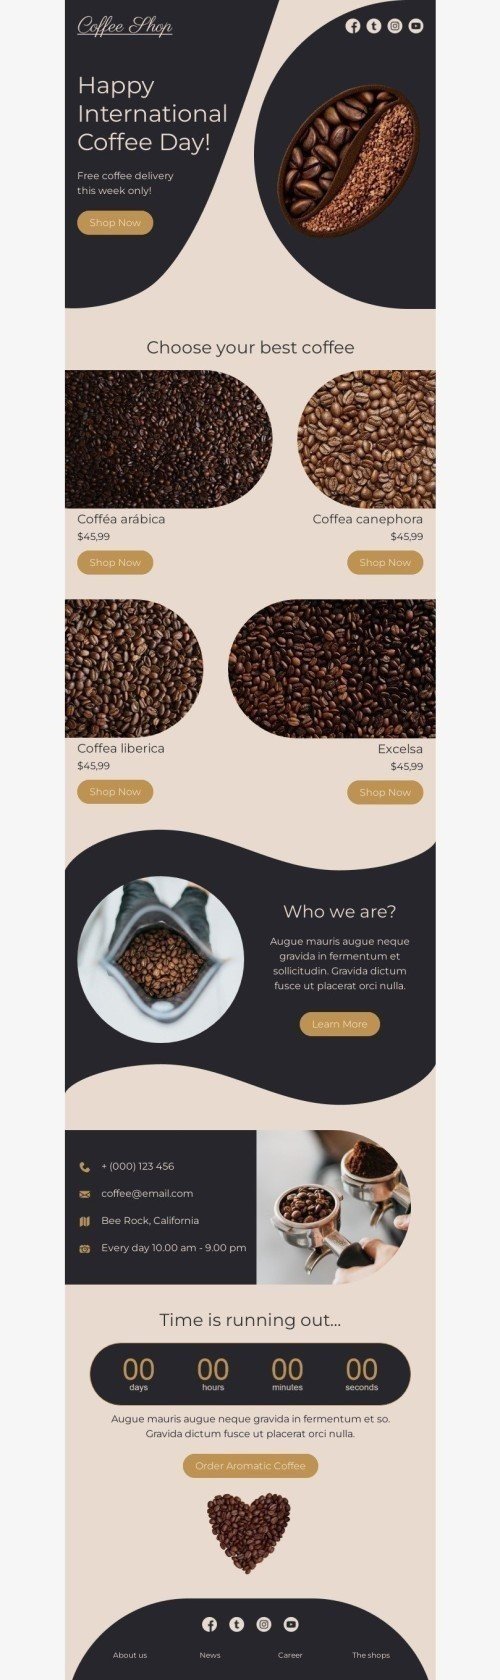 International Coffee Day Email Template "Choose your best coffee" for Beverages industry mobile view